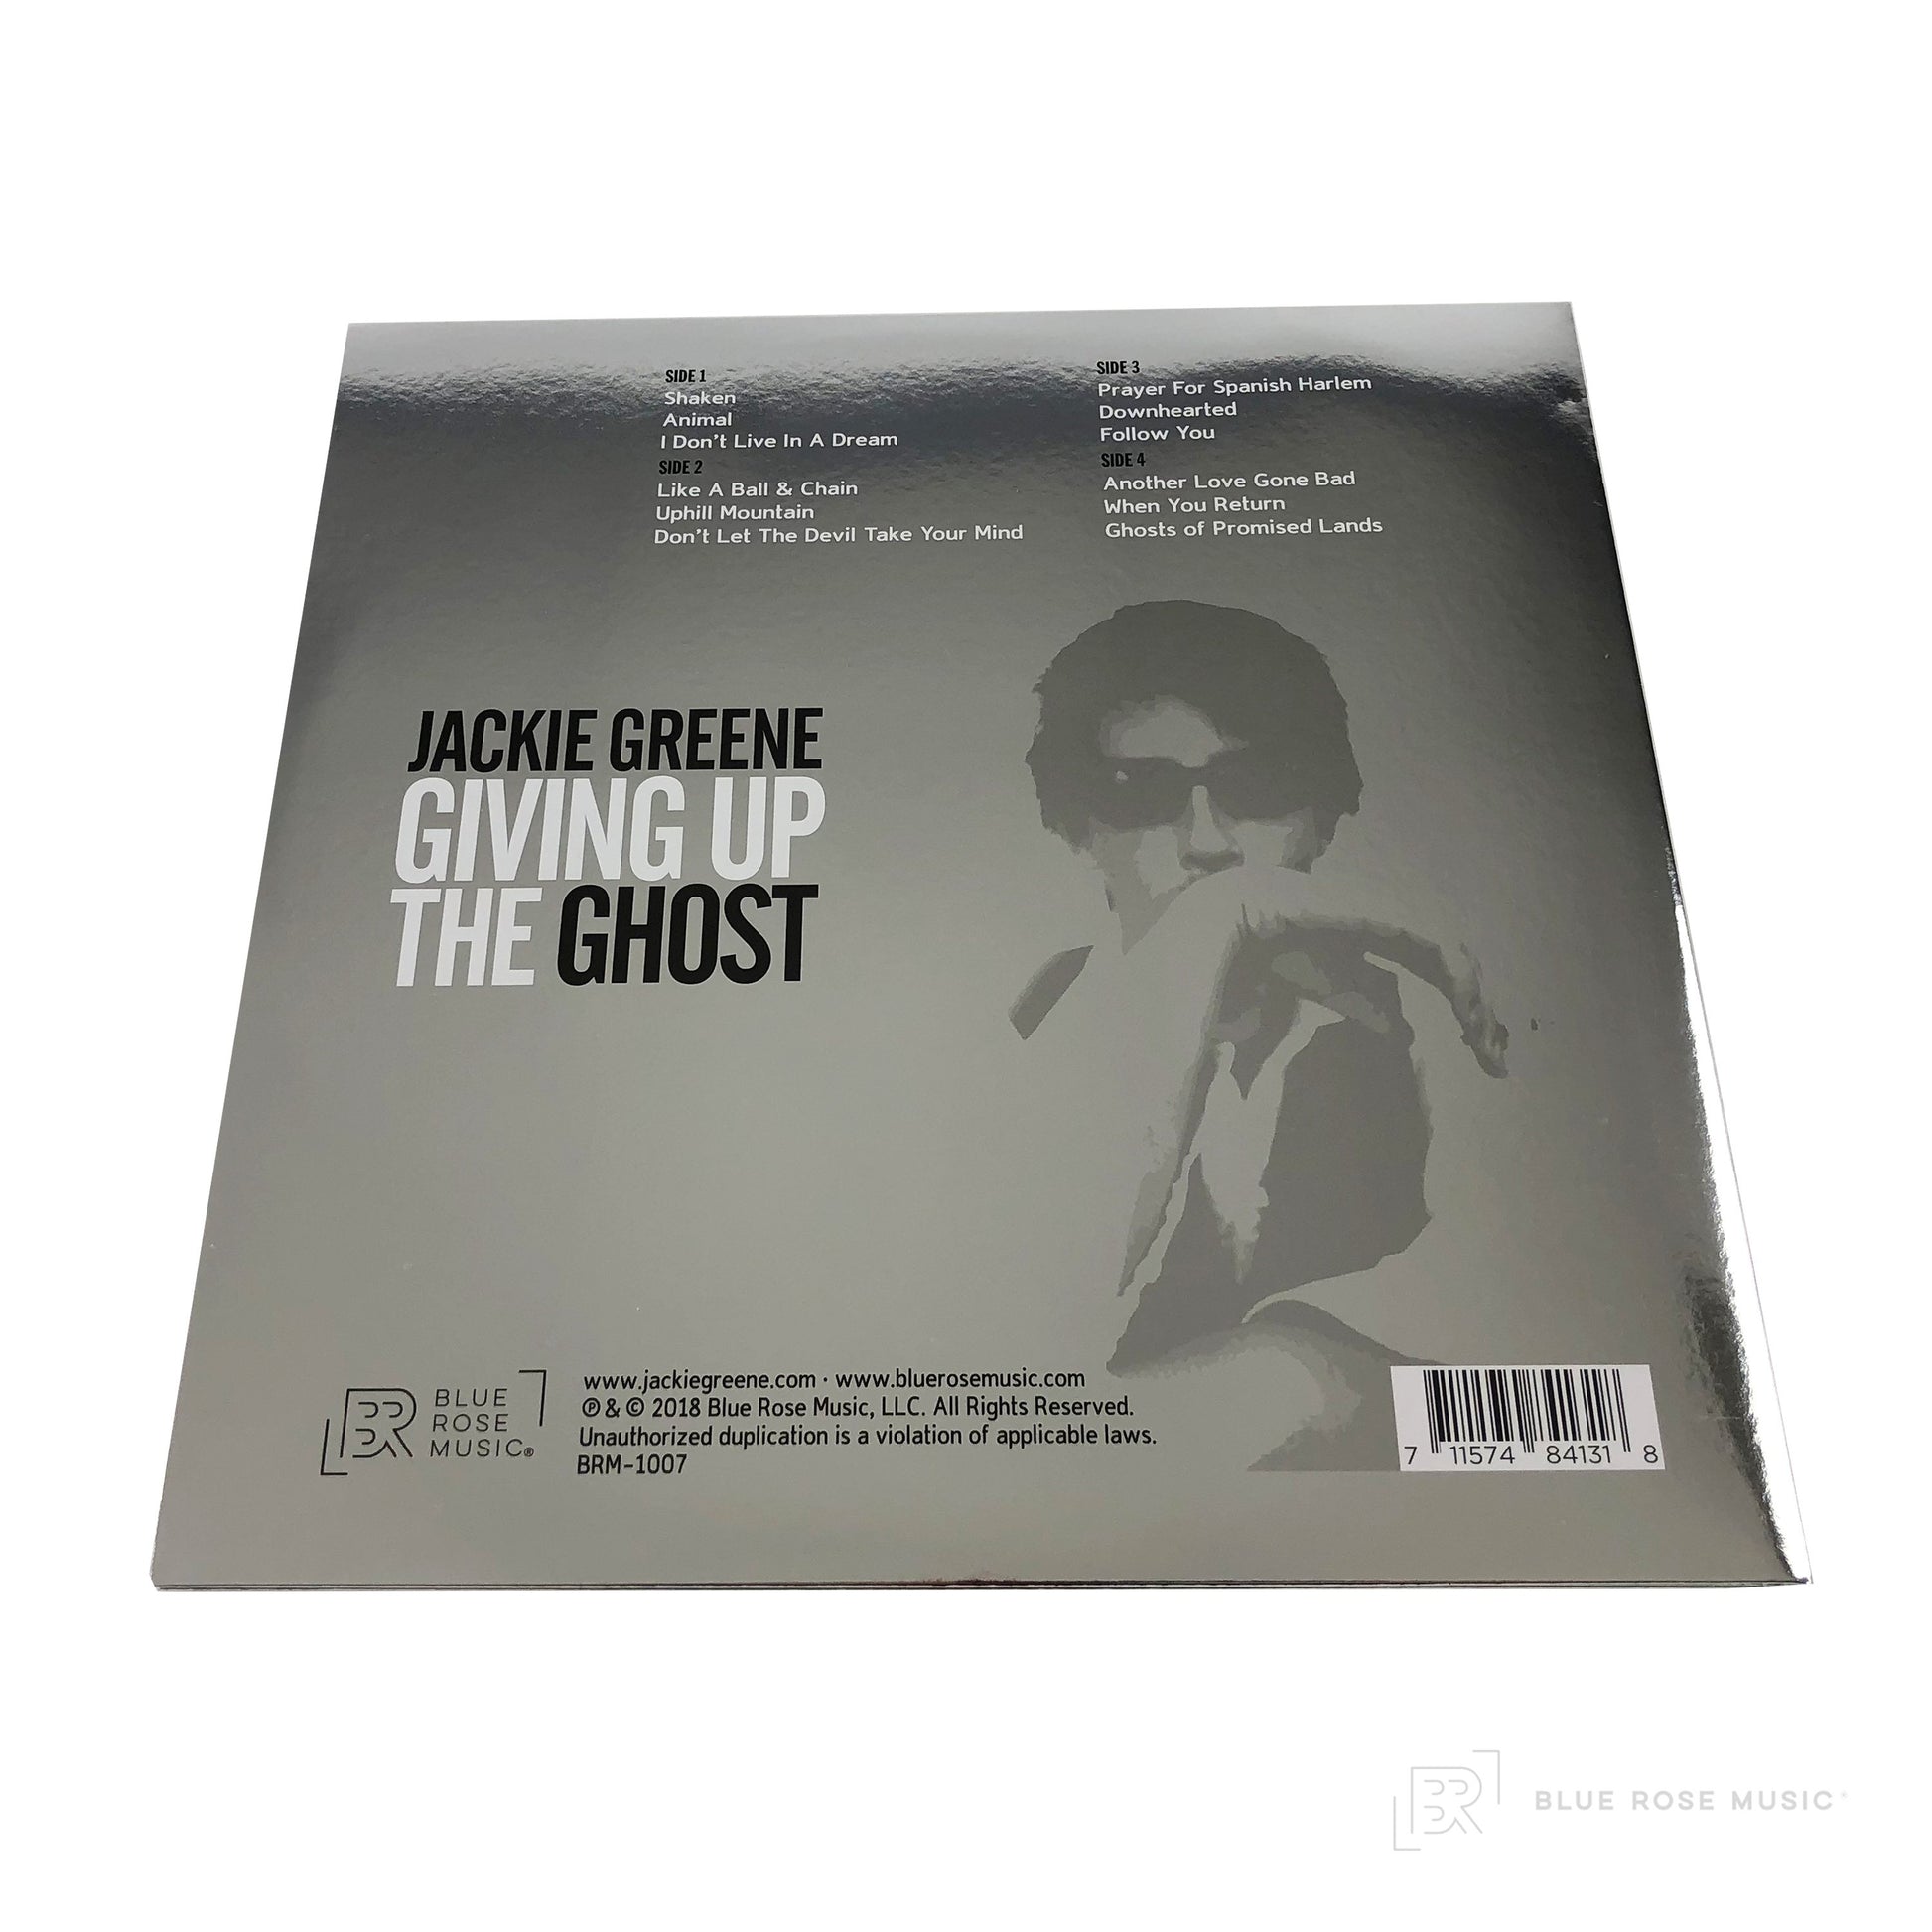 Jackie Greene's Giving Up the Ghost Vinyl Cover 180G, 12” GATEFOLD JACKET, METALLIC SILVER FOIL, DOWNLOAD CARD